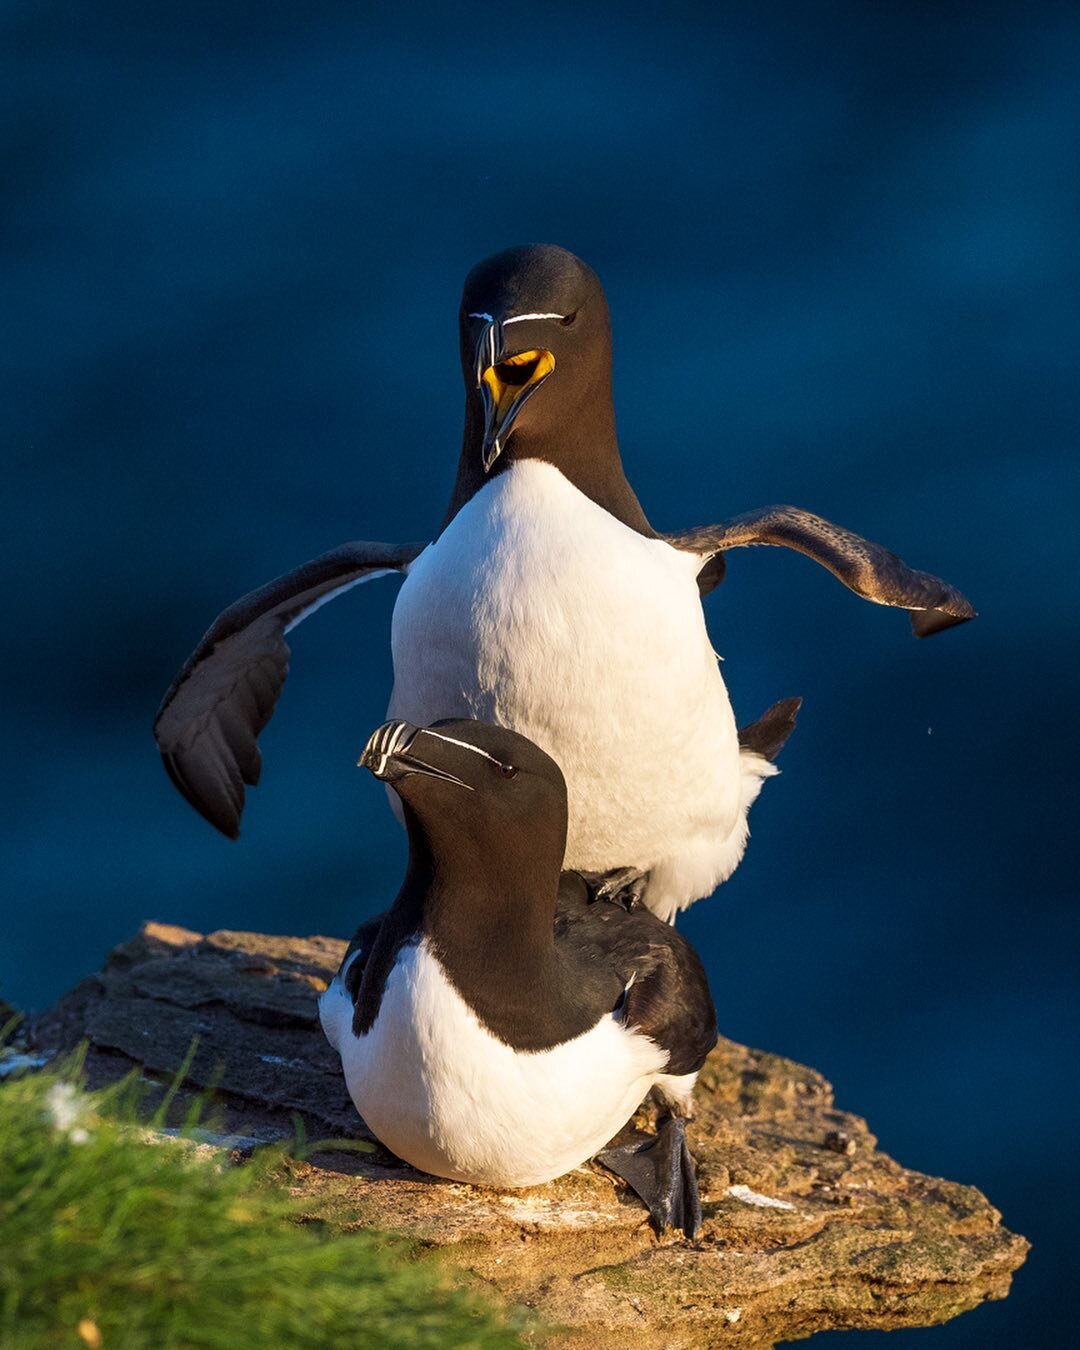 Very grateful that @wildlifephotographicmag chose my image of razorbills mating for their cover! 🙏🙂

Check out the magazine for some great wildlife photography articles 🐾

@omsystem.cameras 

#razorbill #seabirds #wildlifephotography #birdphotogra